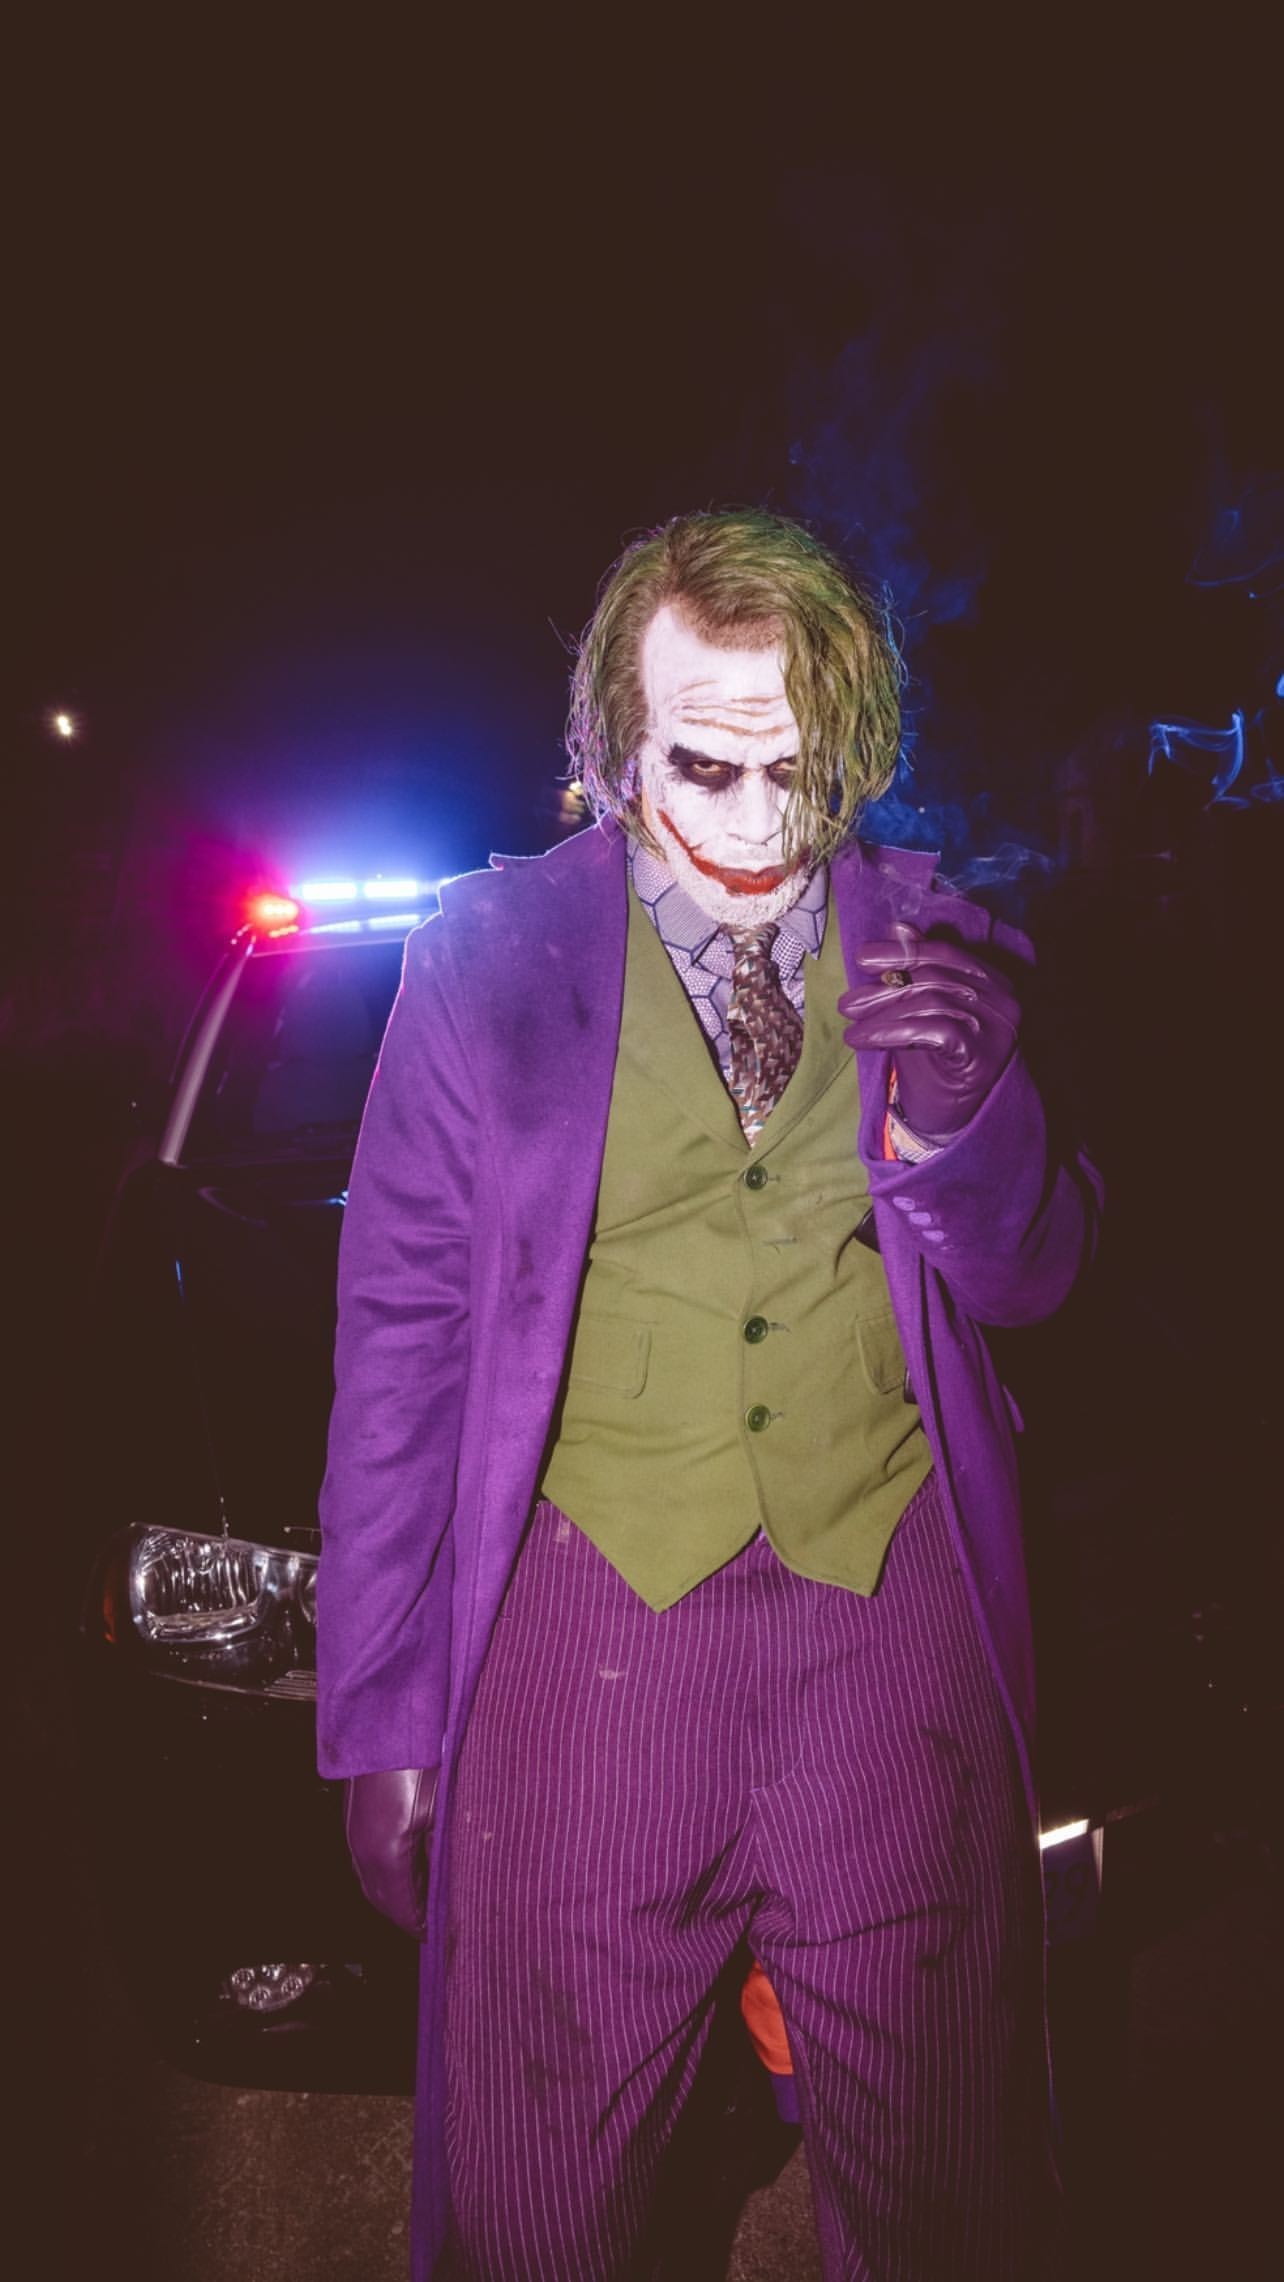 Diddy Wins Halloween With Joker Costume, Uses Emergency Vehicles as